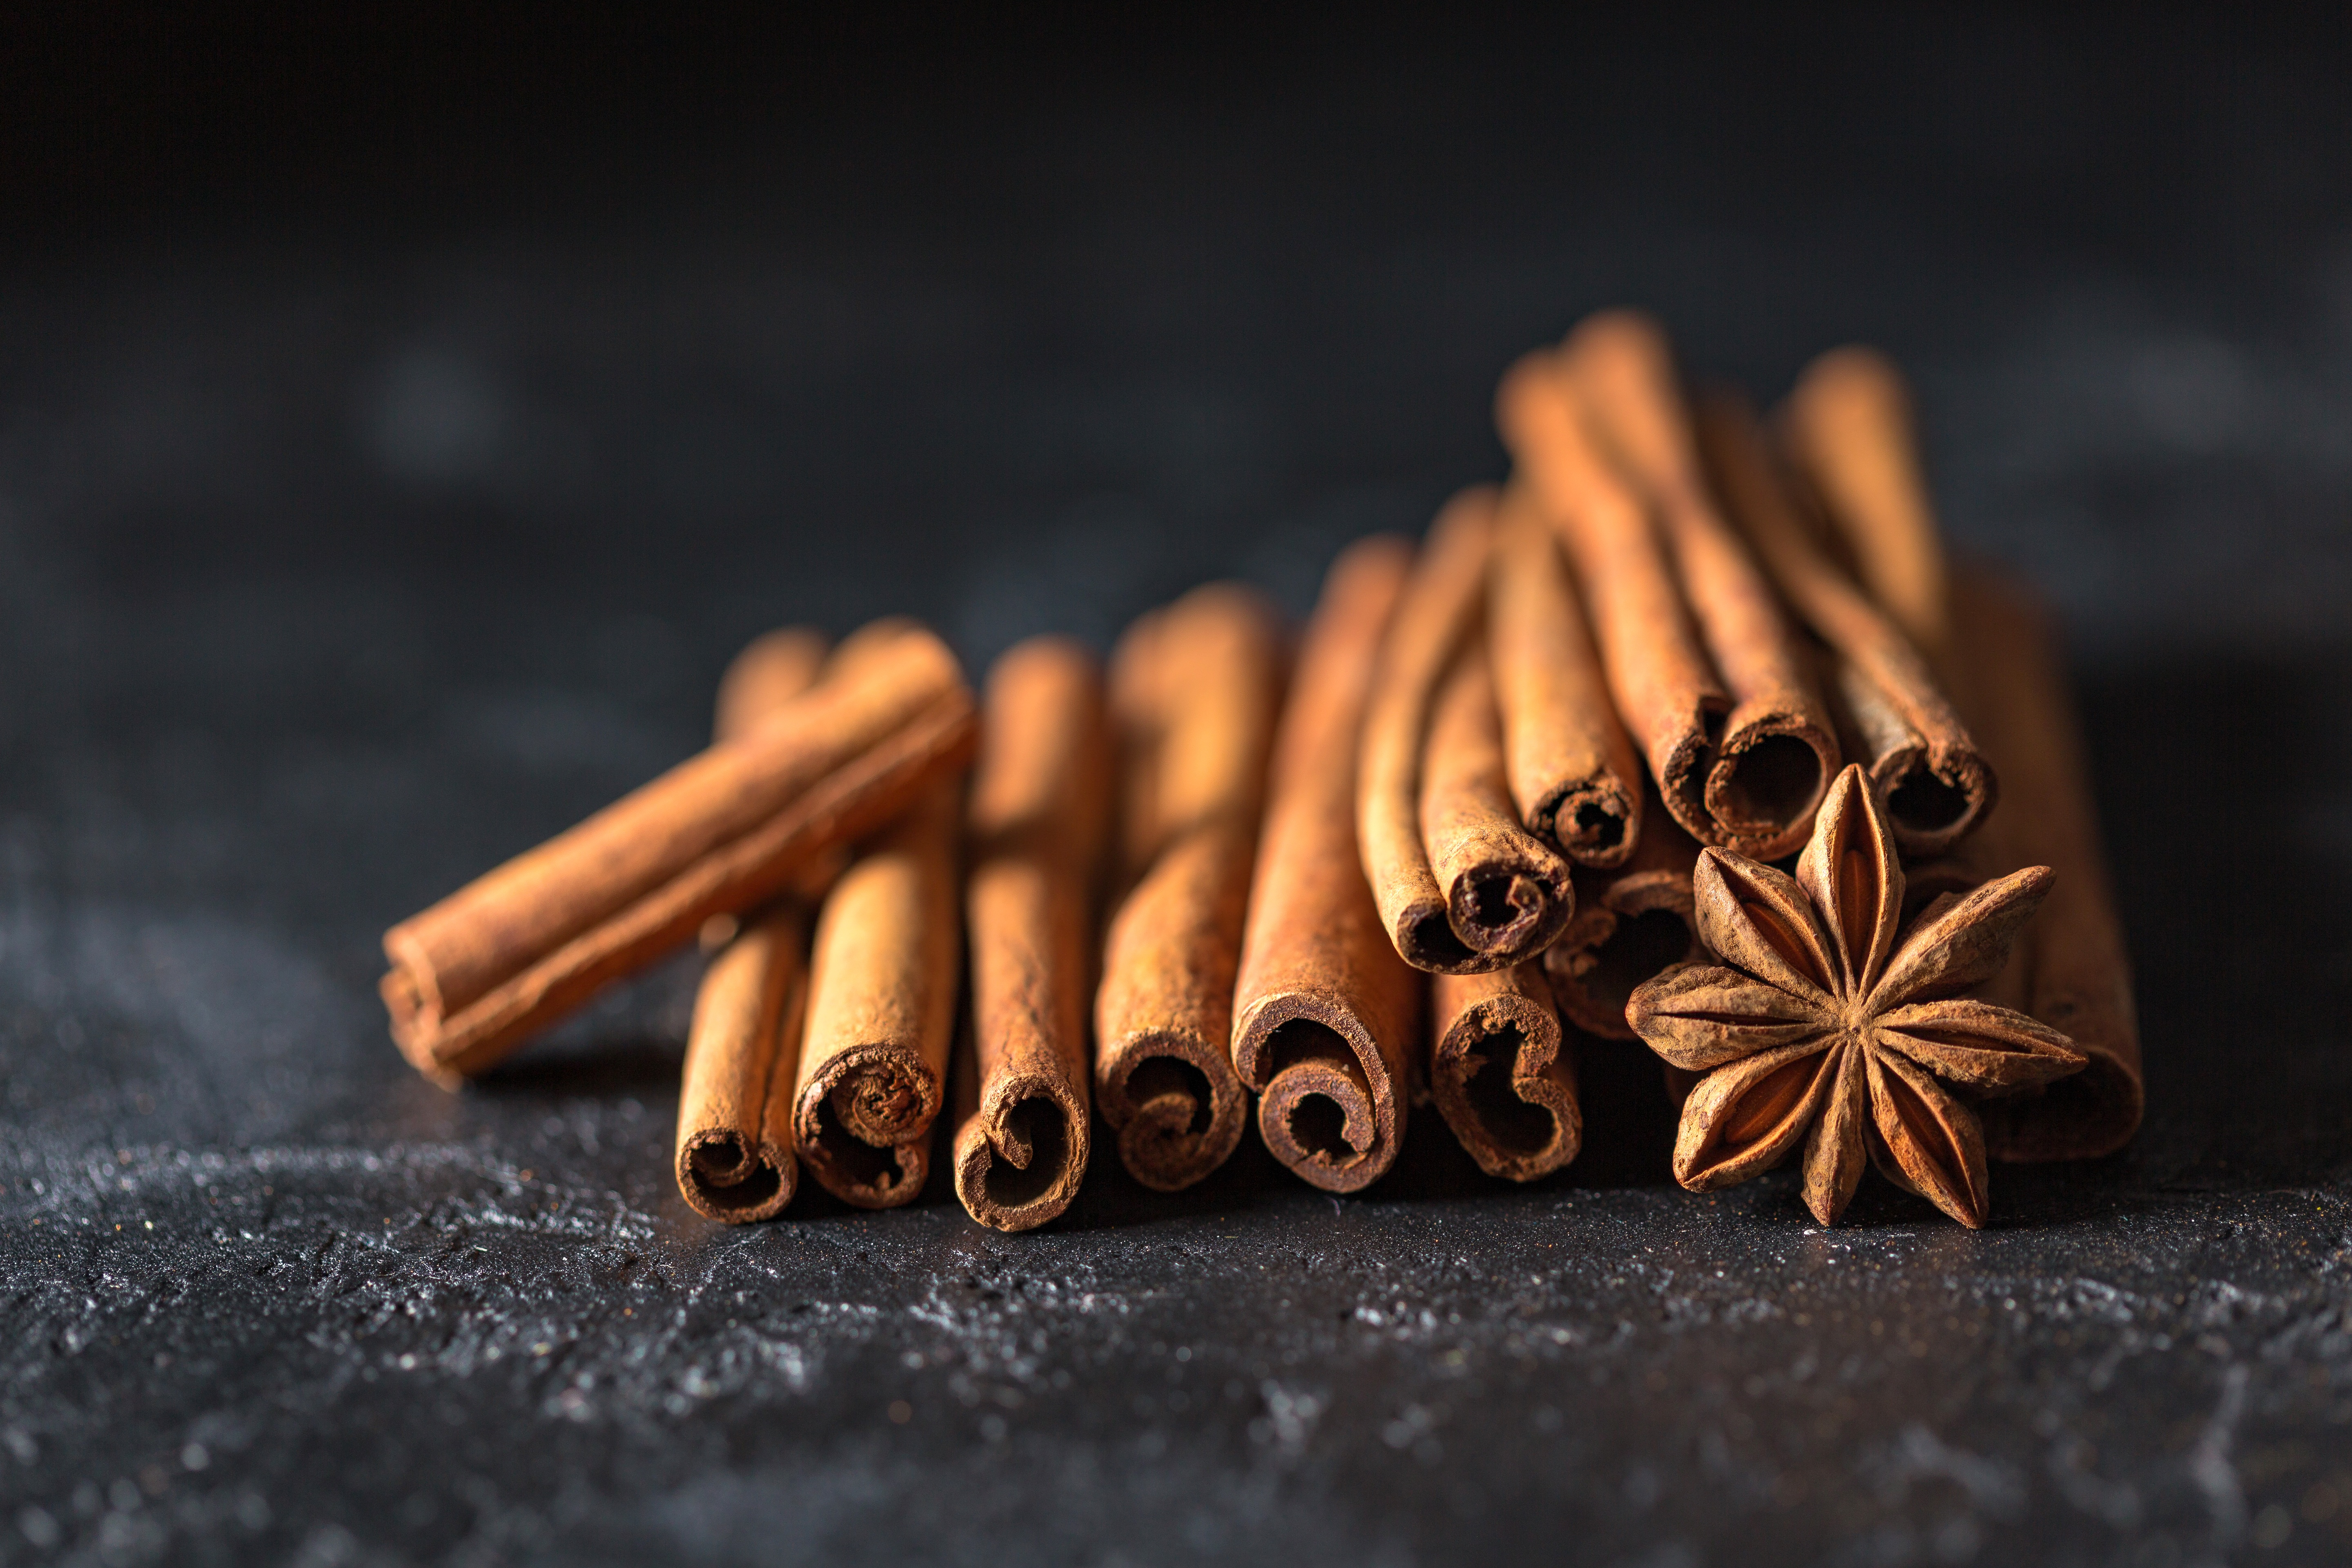 97351 download wallpaper food, cinnamon, spice, spices, badian, badyan, anise screensavers and pictures for free